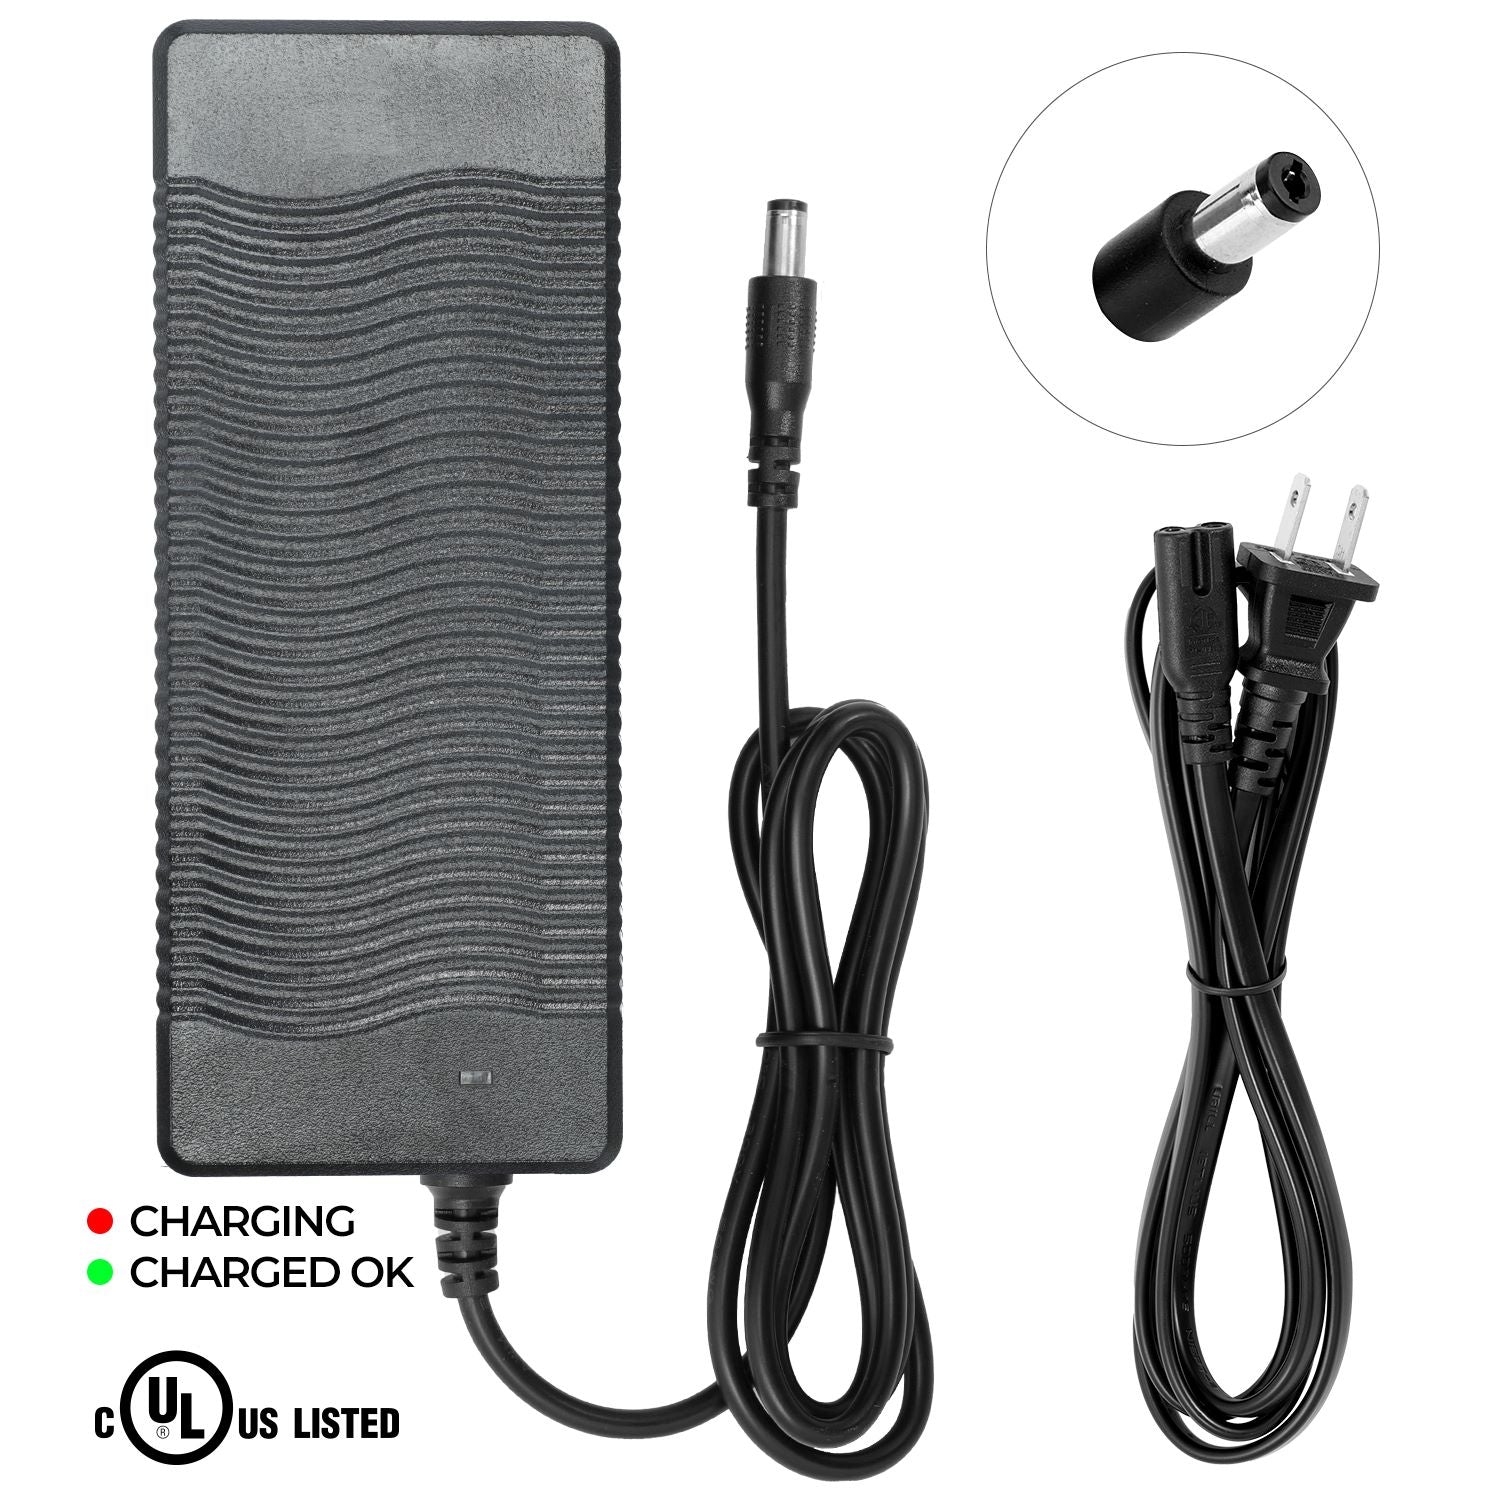 UL Listed Charger for 48V Magnum eBikes (Please Make Sure Your Battery Pack is 48V)